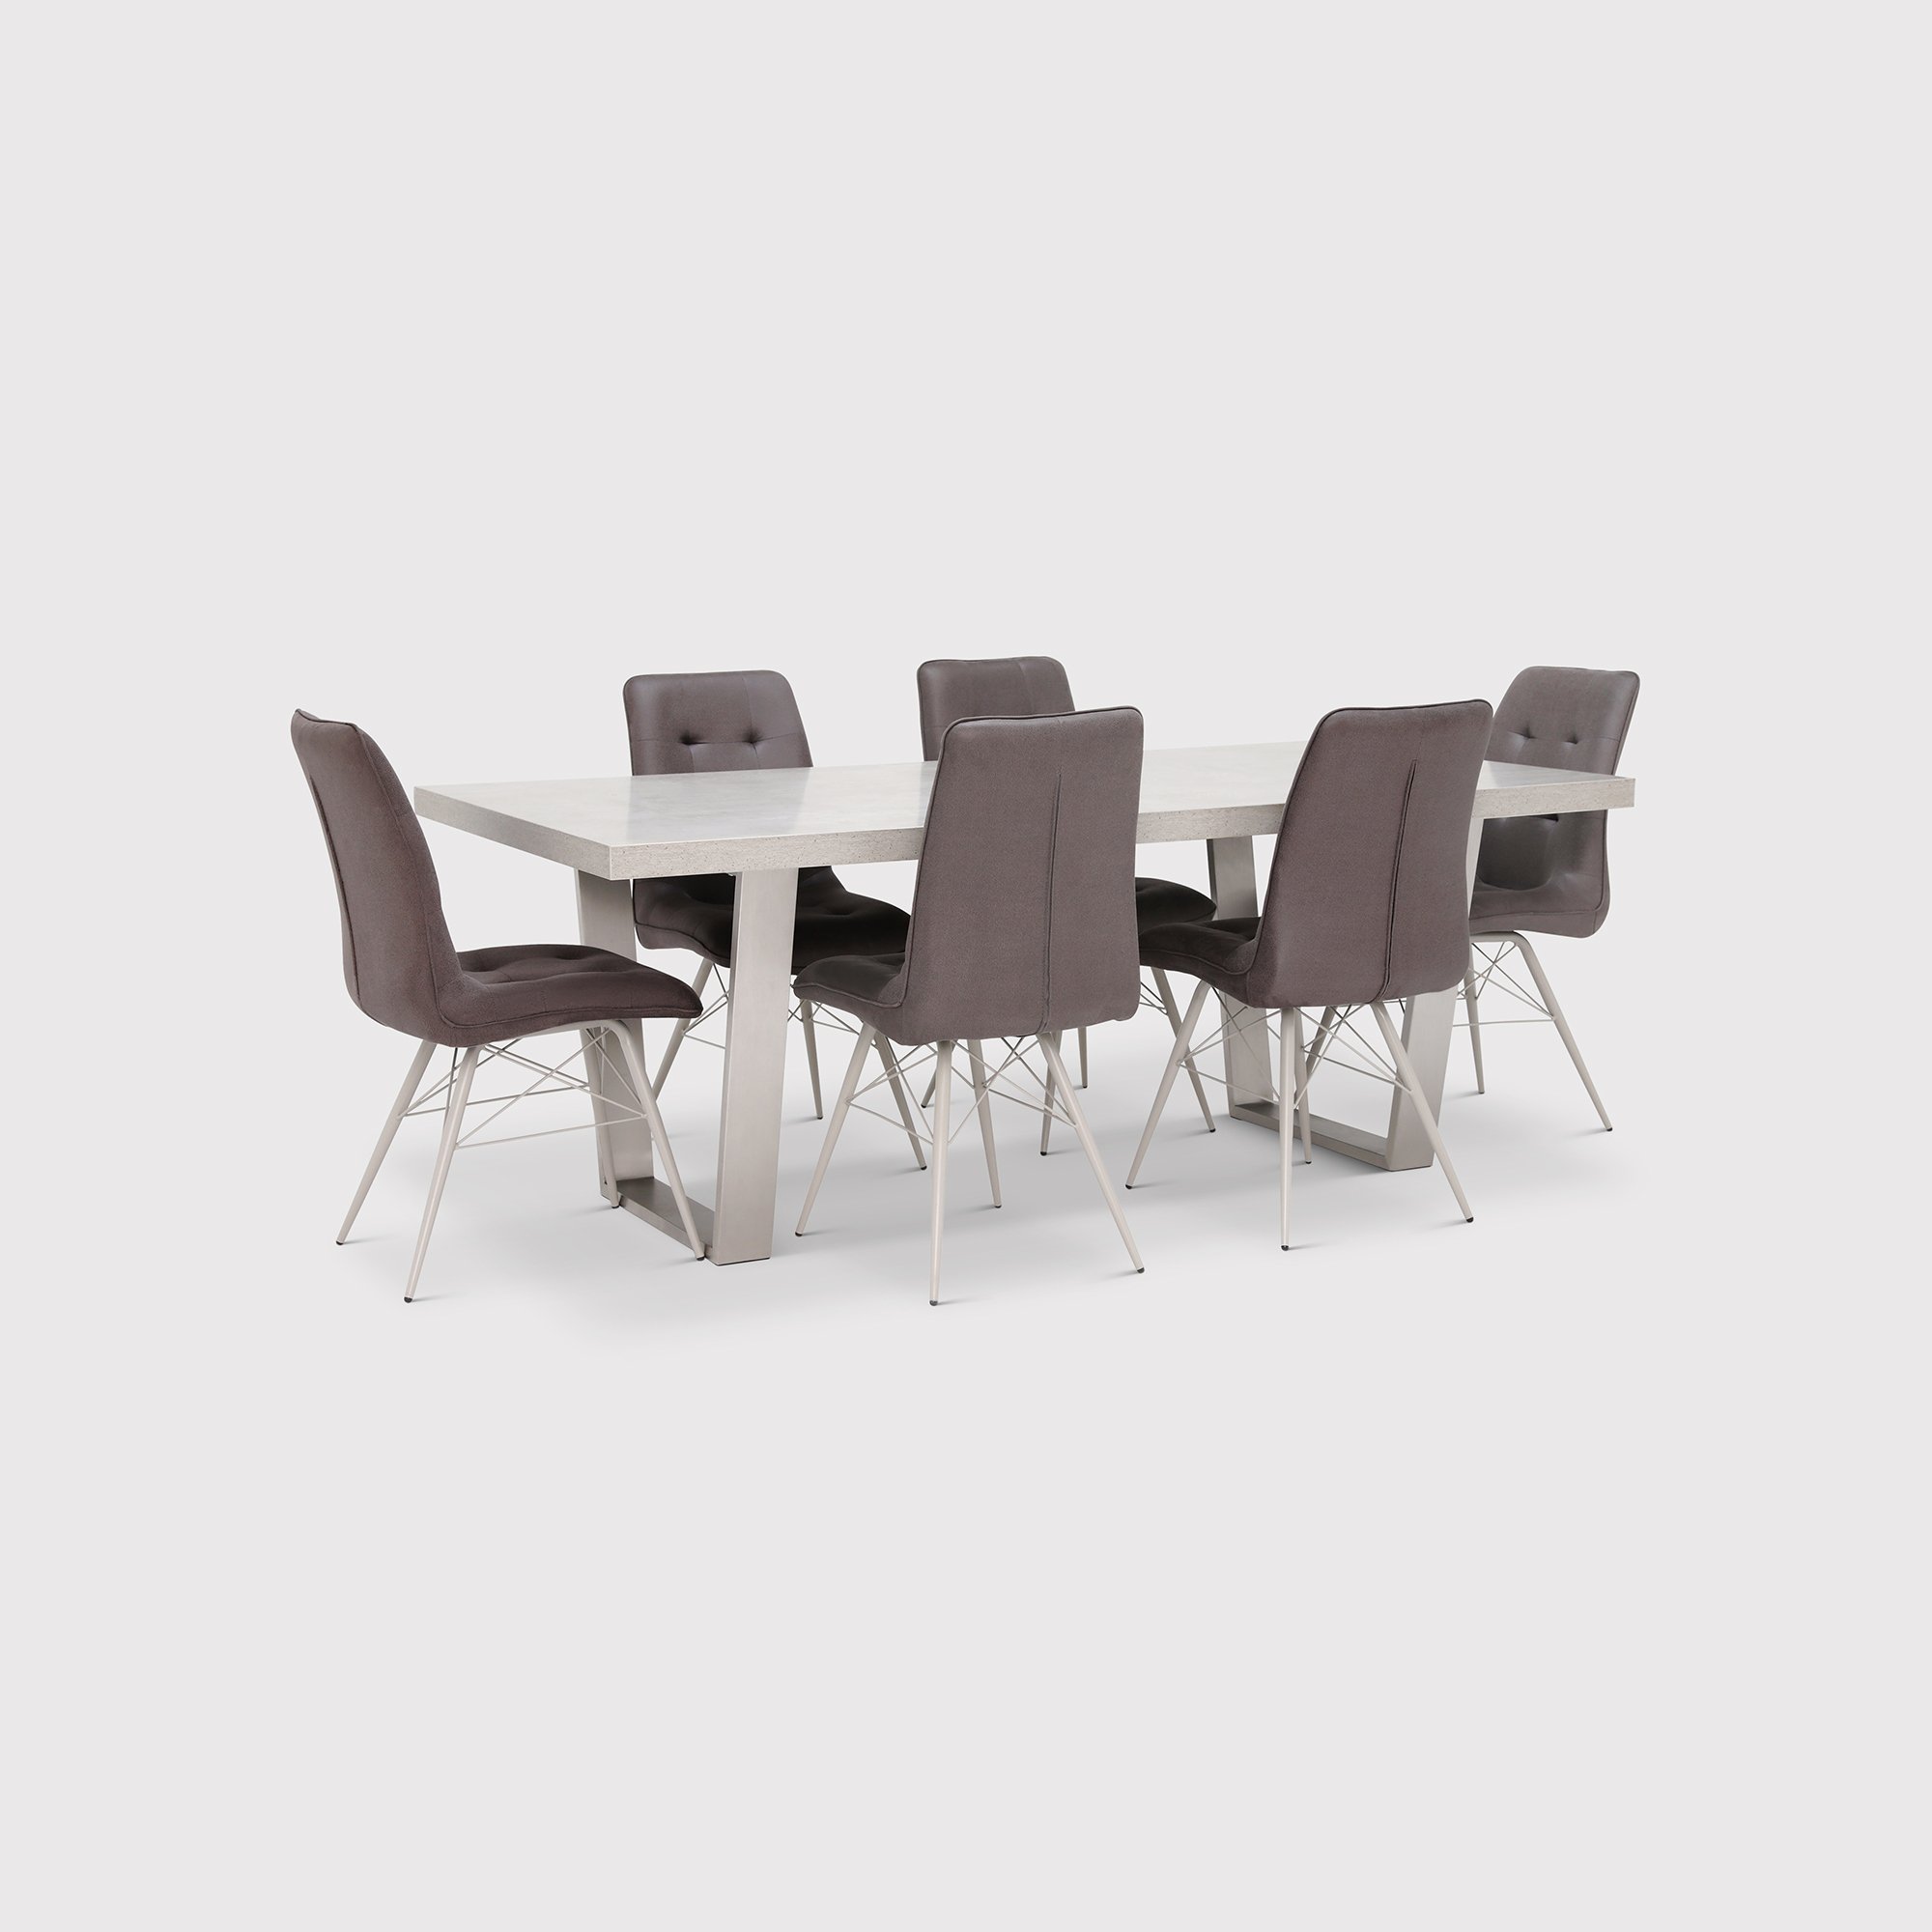 Halmstad Dining Table & 6 Hix Chairs, Grey Concrete Effect | Barker & Stonehouse